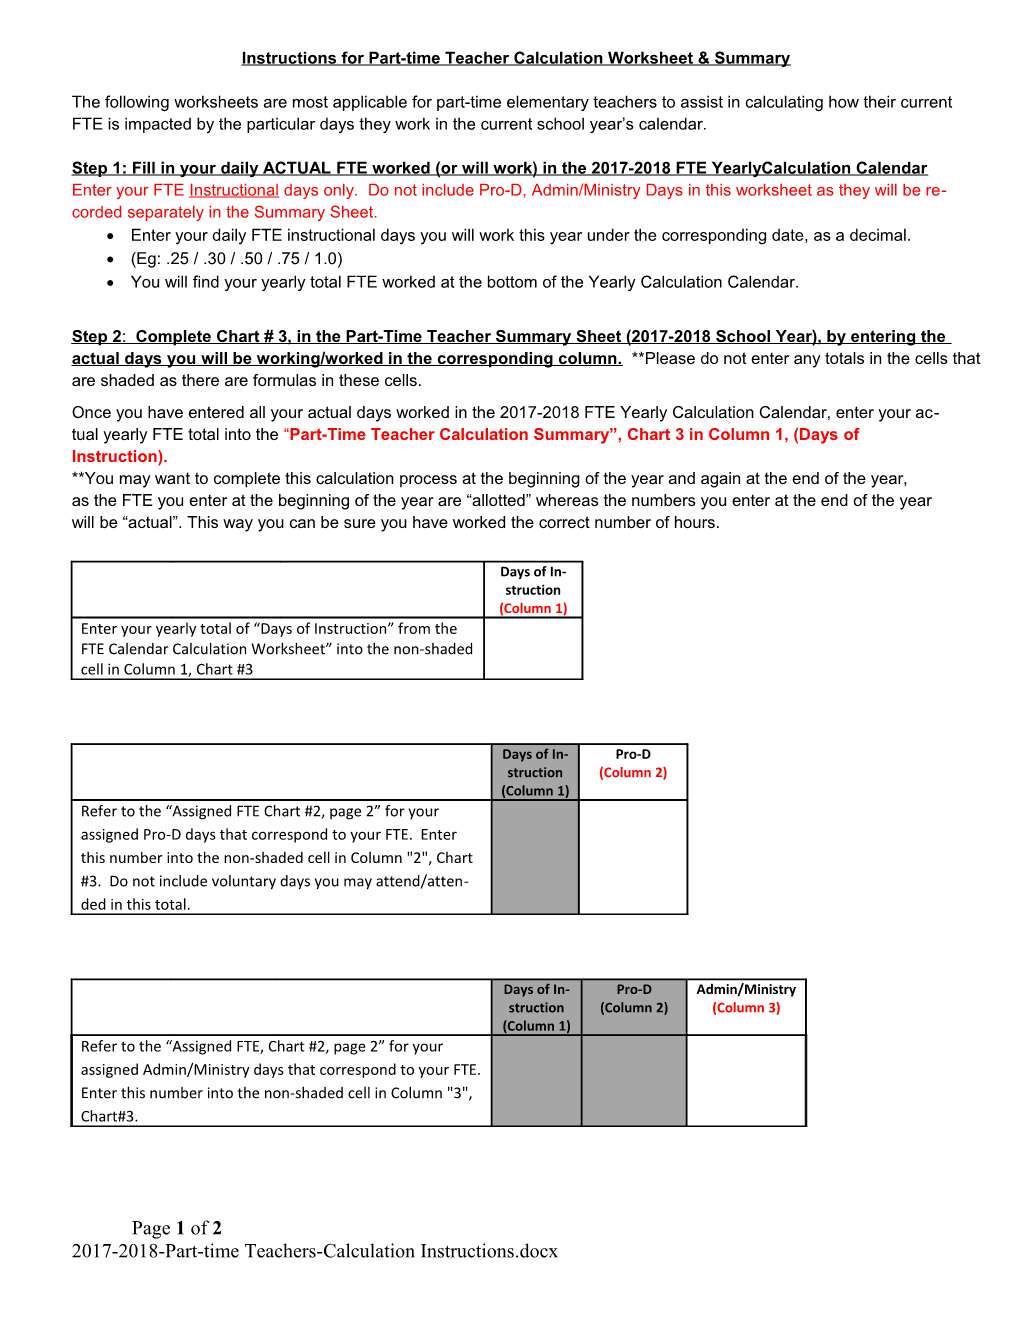 Instructions for Part-Time Teacher Calculation Worksheet & Summary